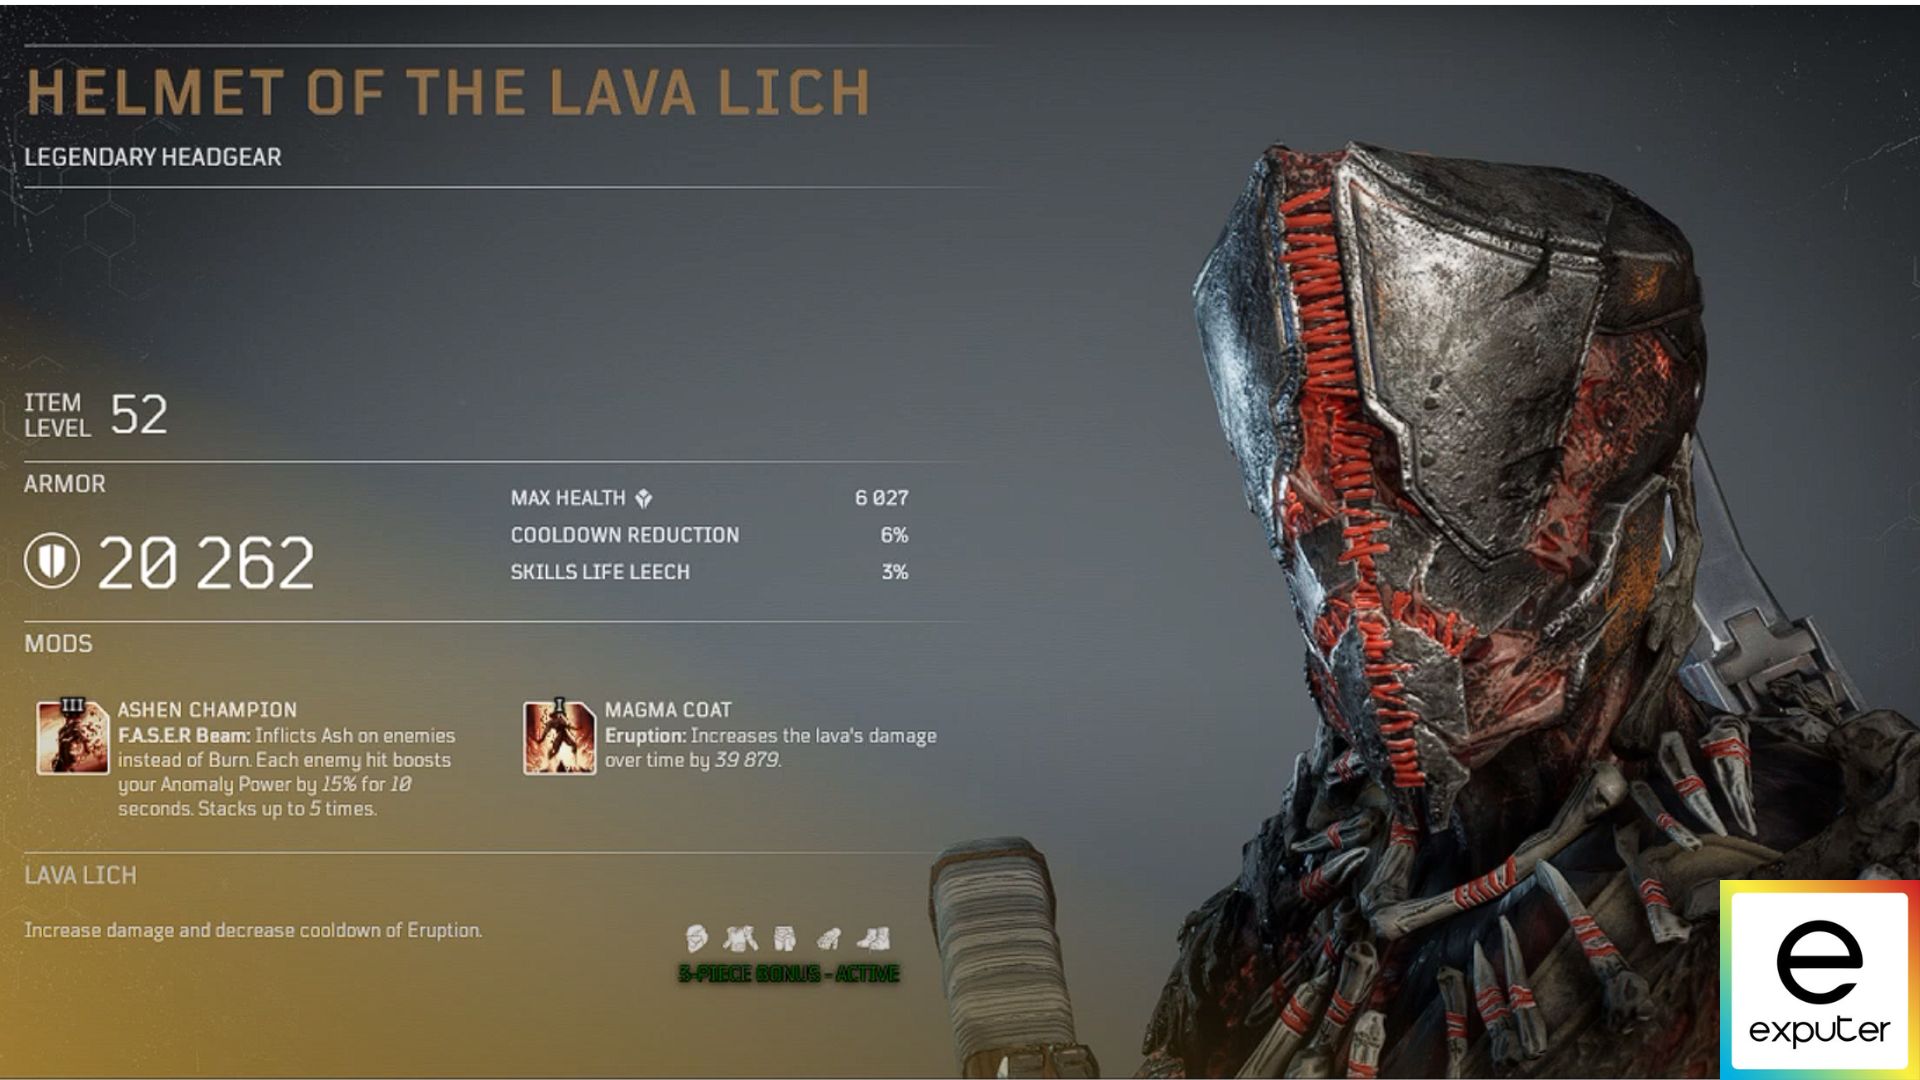 Lava Lich Armor Set's Helmet in Outriders.